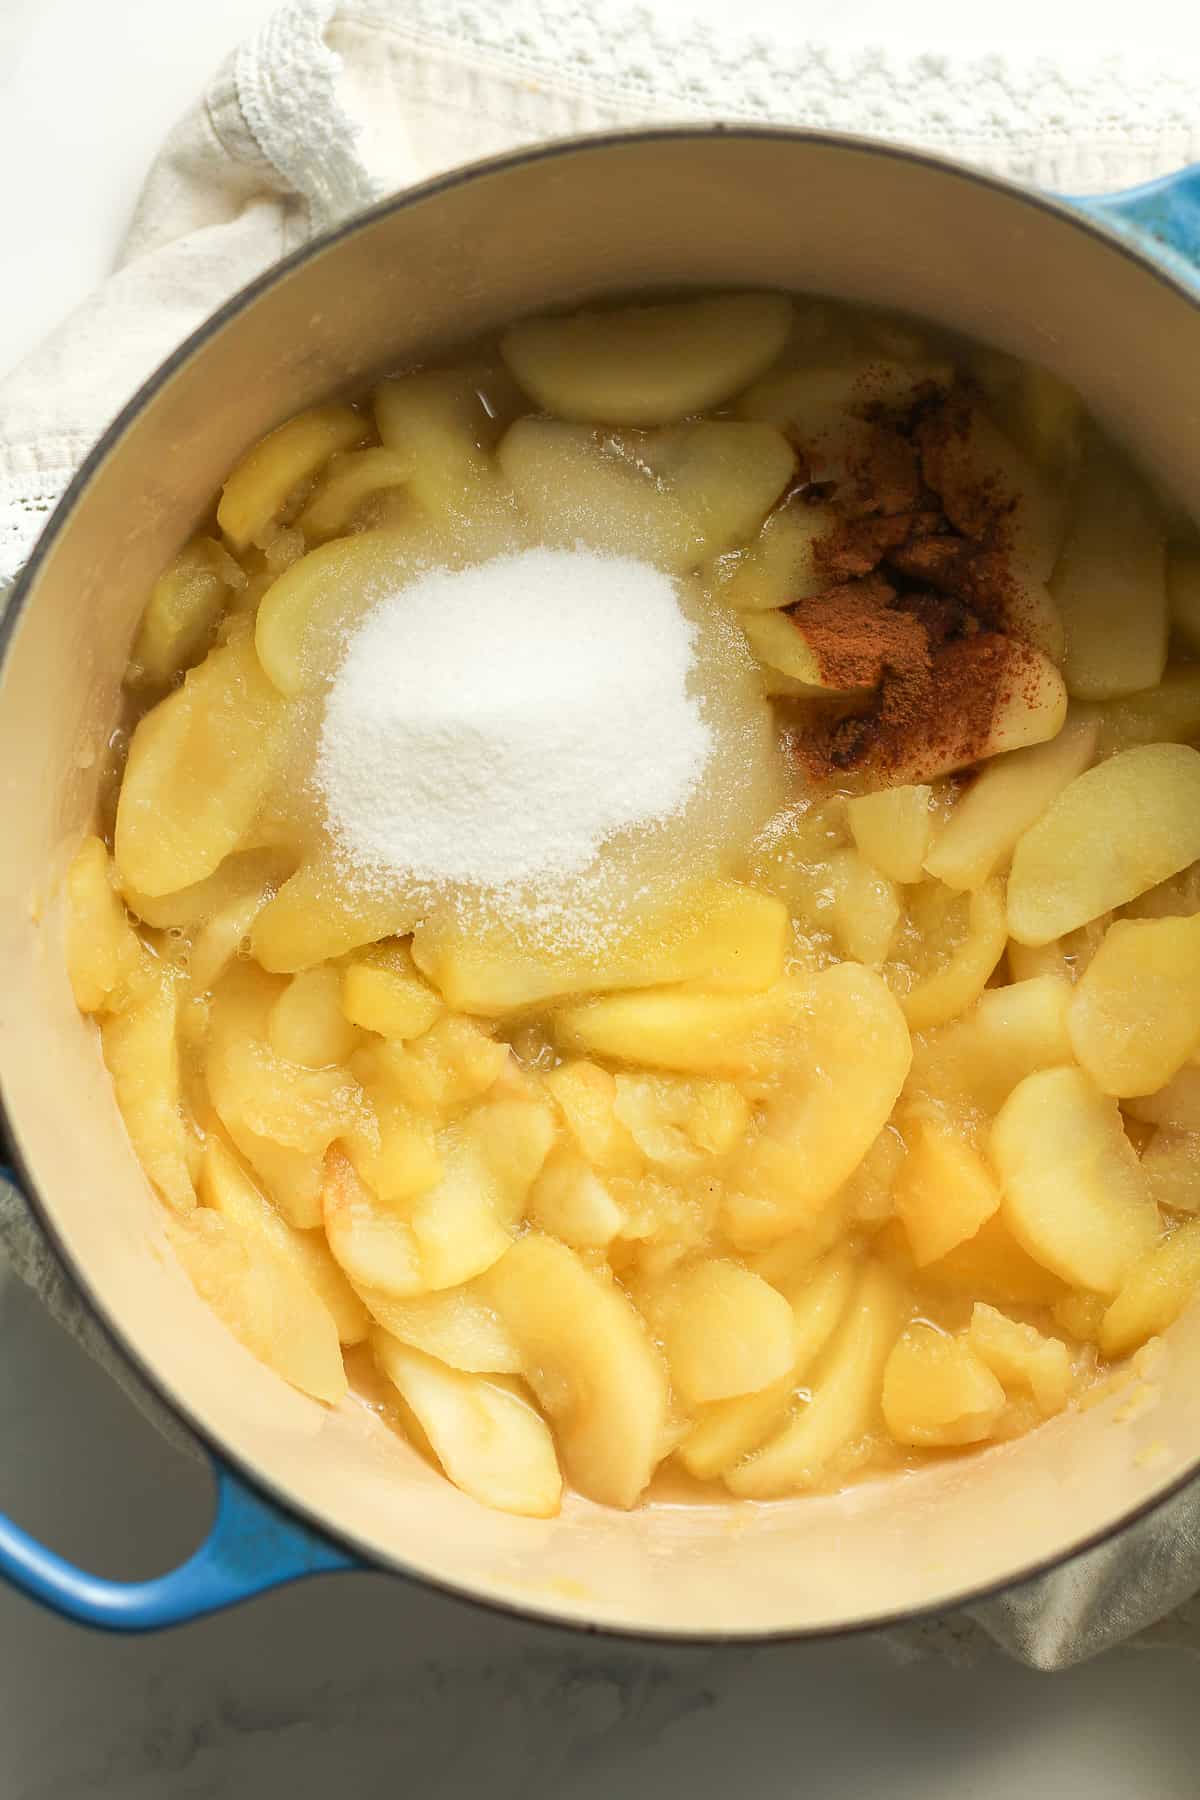 Stock pot of cooked apples with sugar and cinnamon.